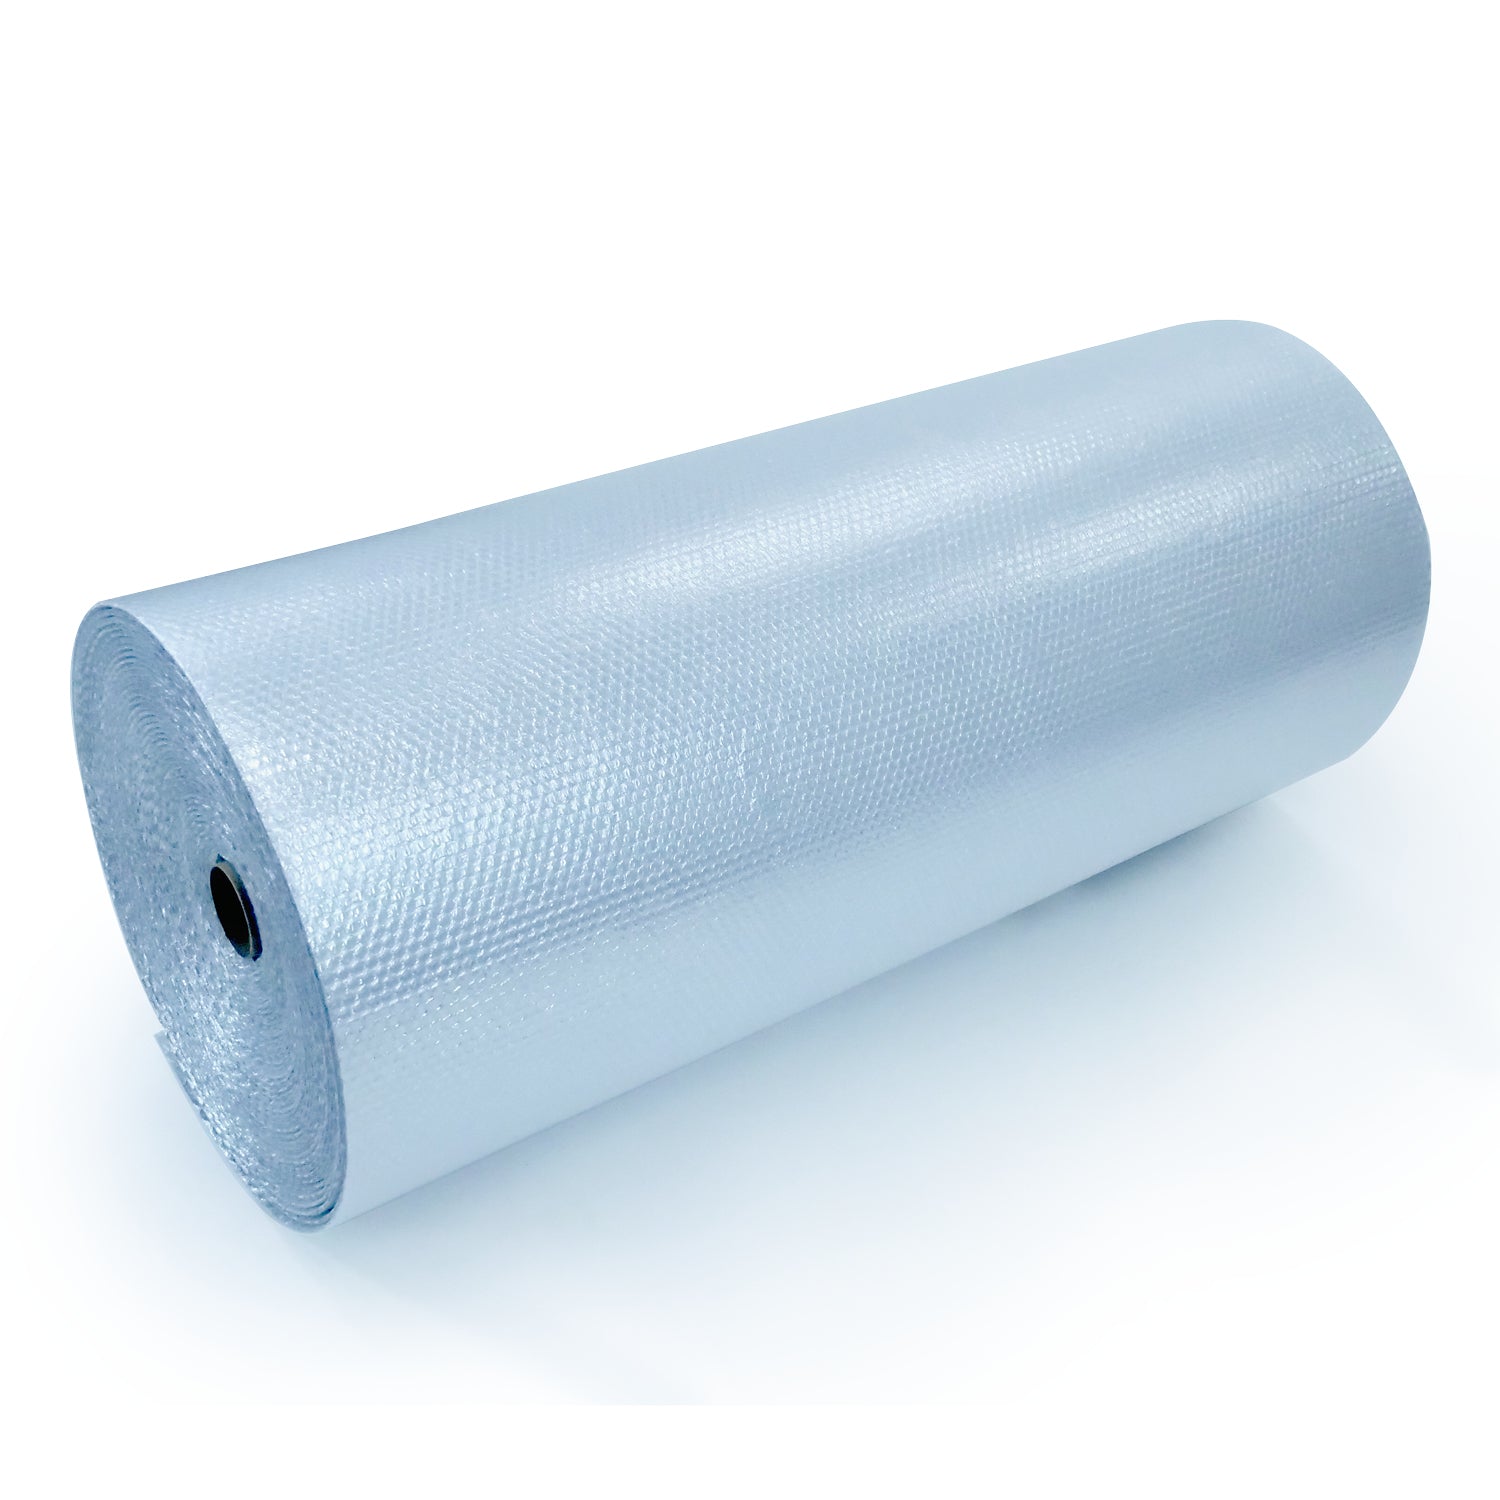 Simply Done Perforated Plastic Wrap Roll